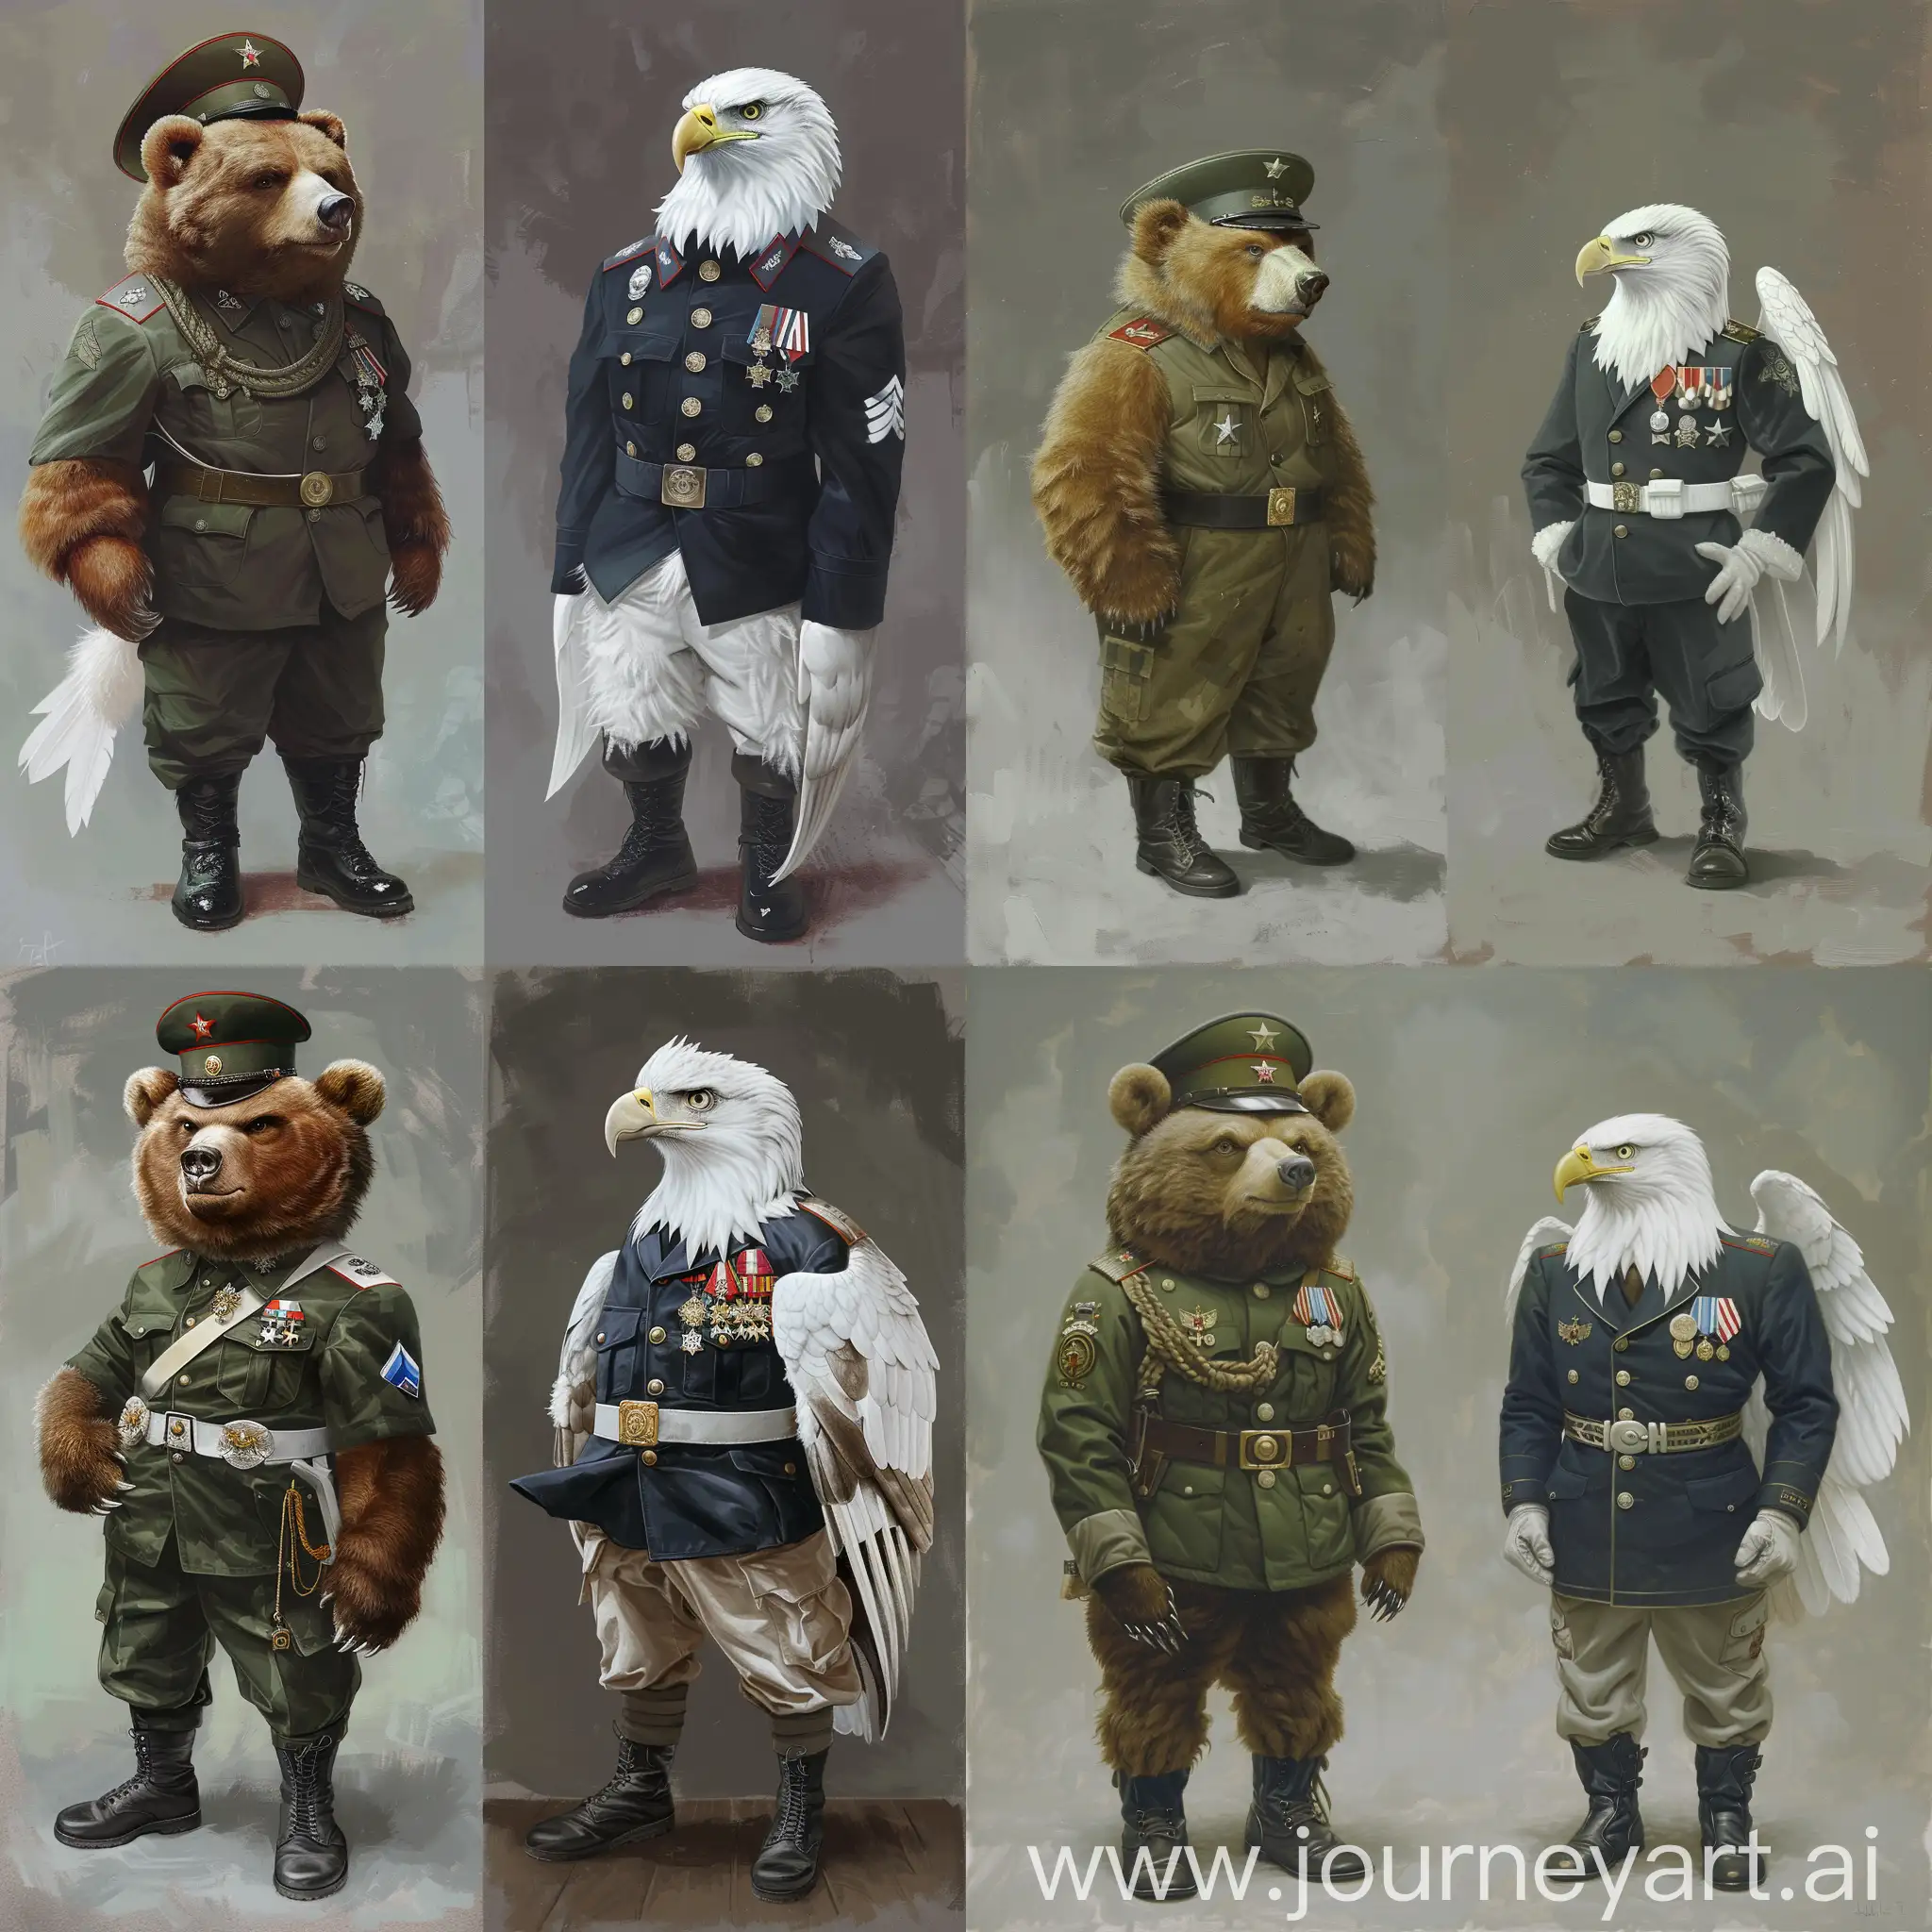 Historic painting style:

At left, a cute furry brown bear, this bear wears a deep green color Russian military hat, uniform, pants and black boots.

At right, a cute furry white eagle with white wing, this eagle wears deep marine blue color USA military hat, uniform, pants and black boots.

#808080 gray color as background.